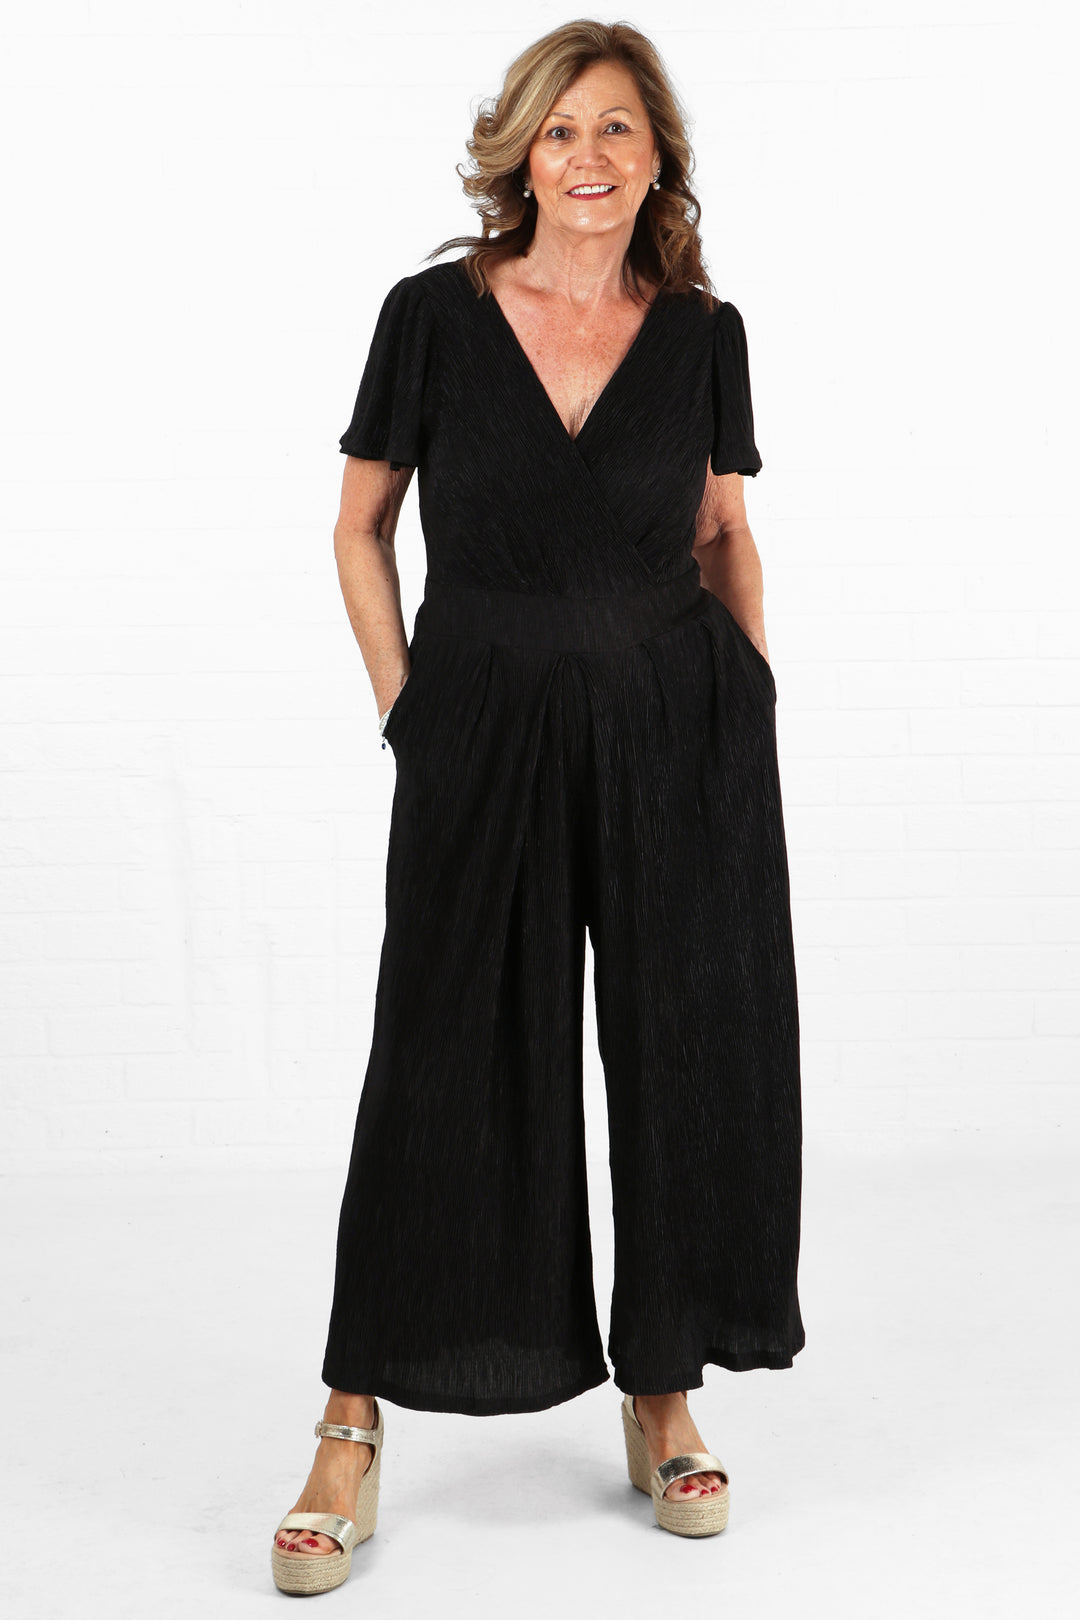 model wearing a black plisse jumpsuit with short angel sleeves and a v neck